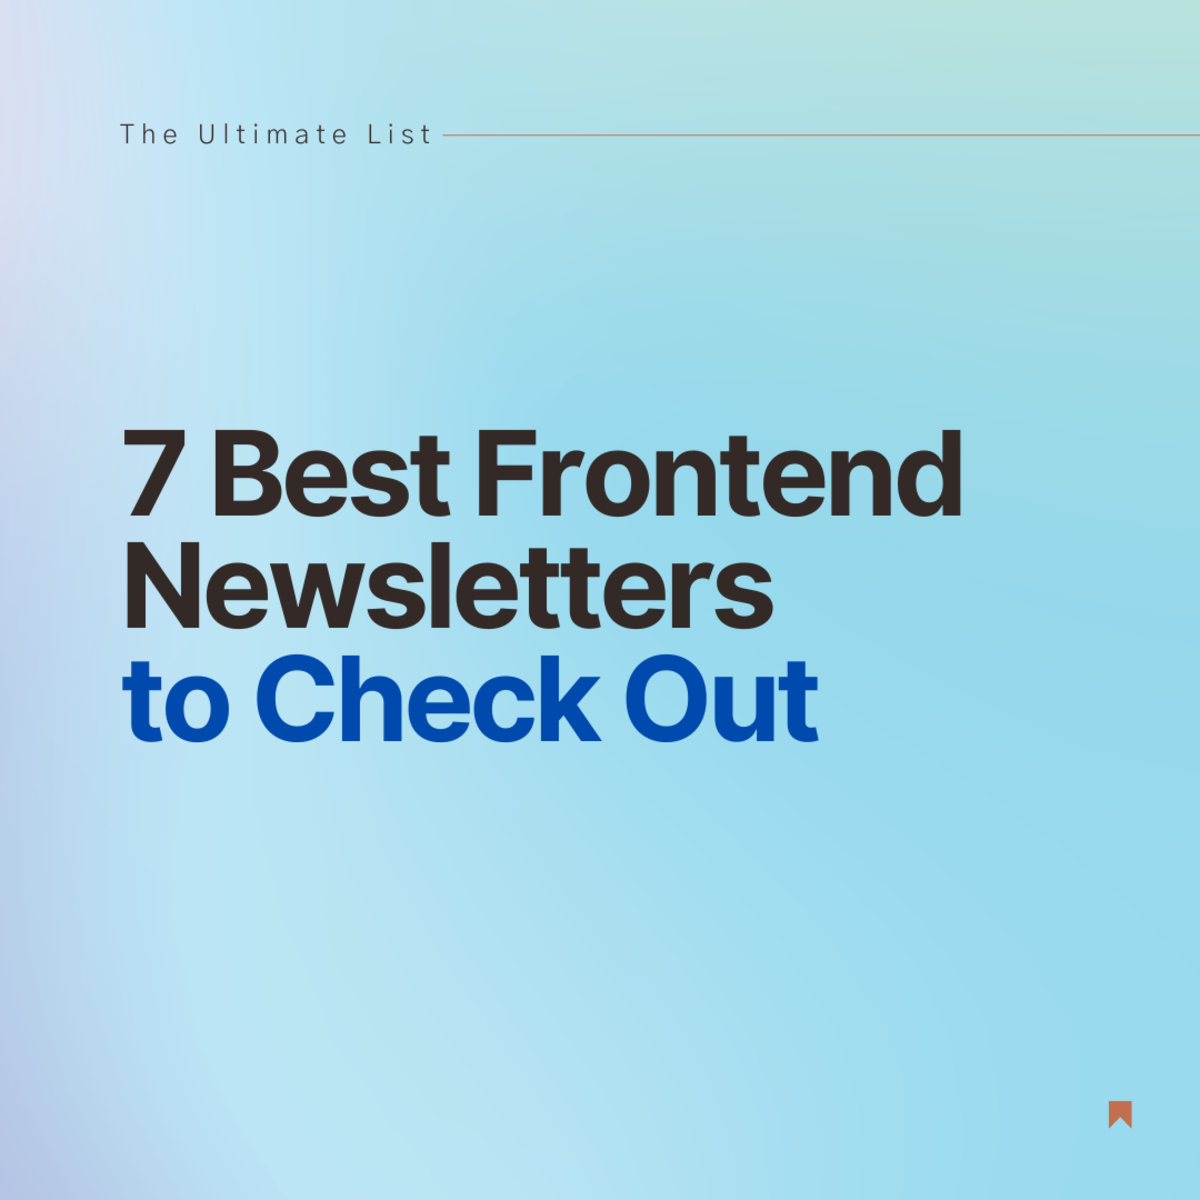 Discover some of the best frontend newsletters to check out in this ultimate list!